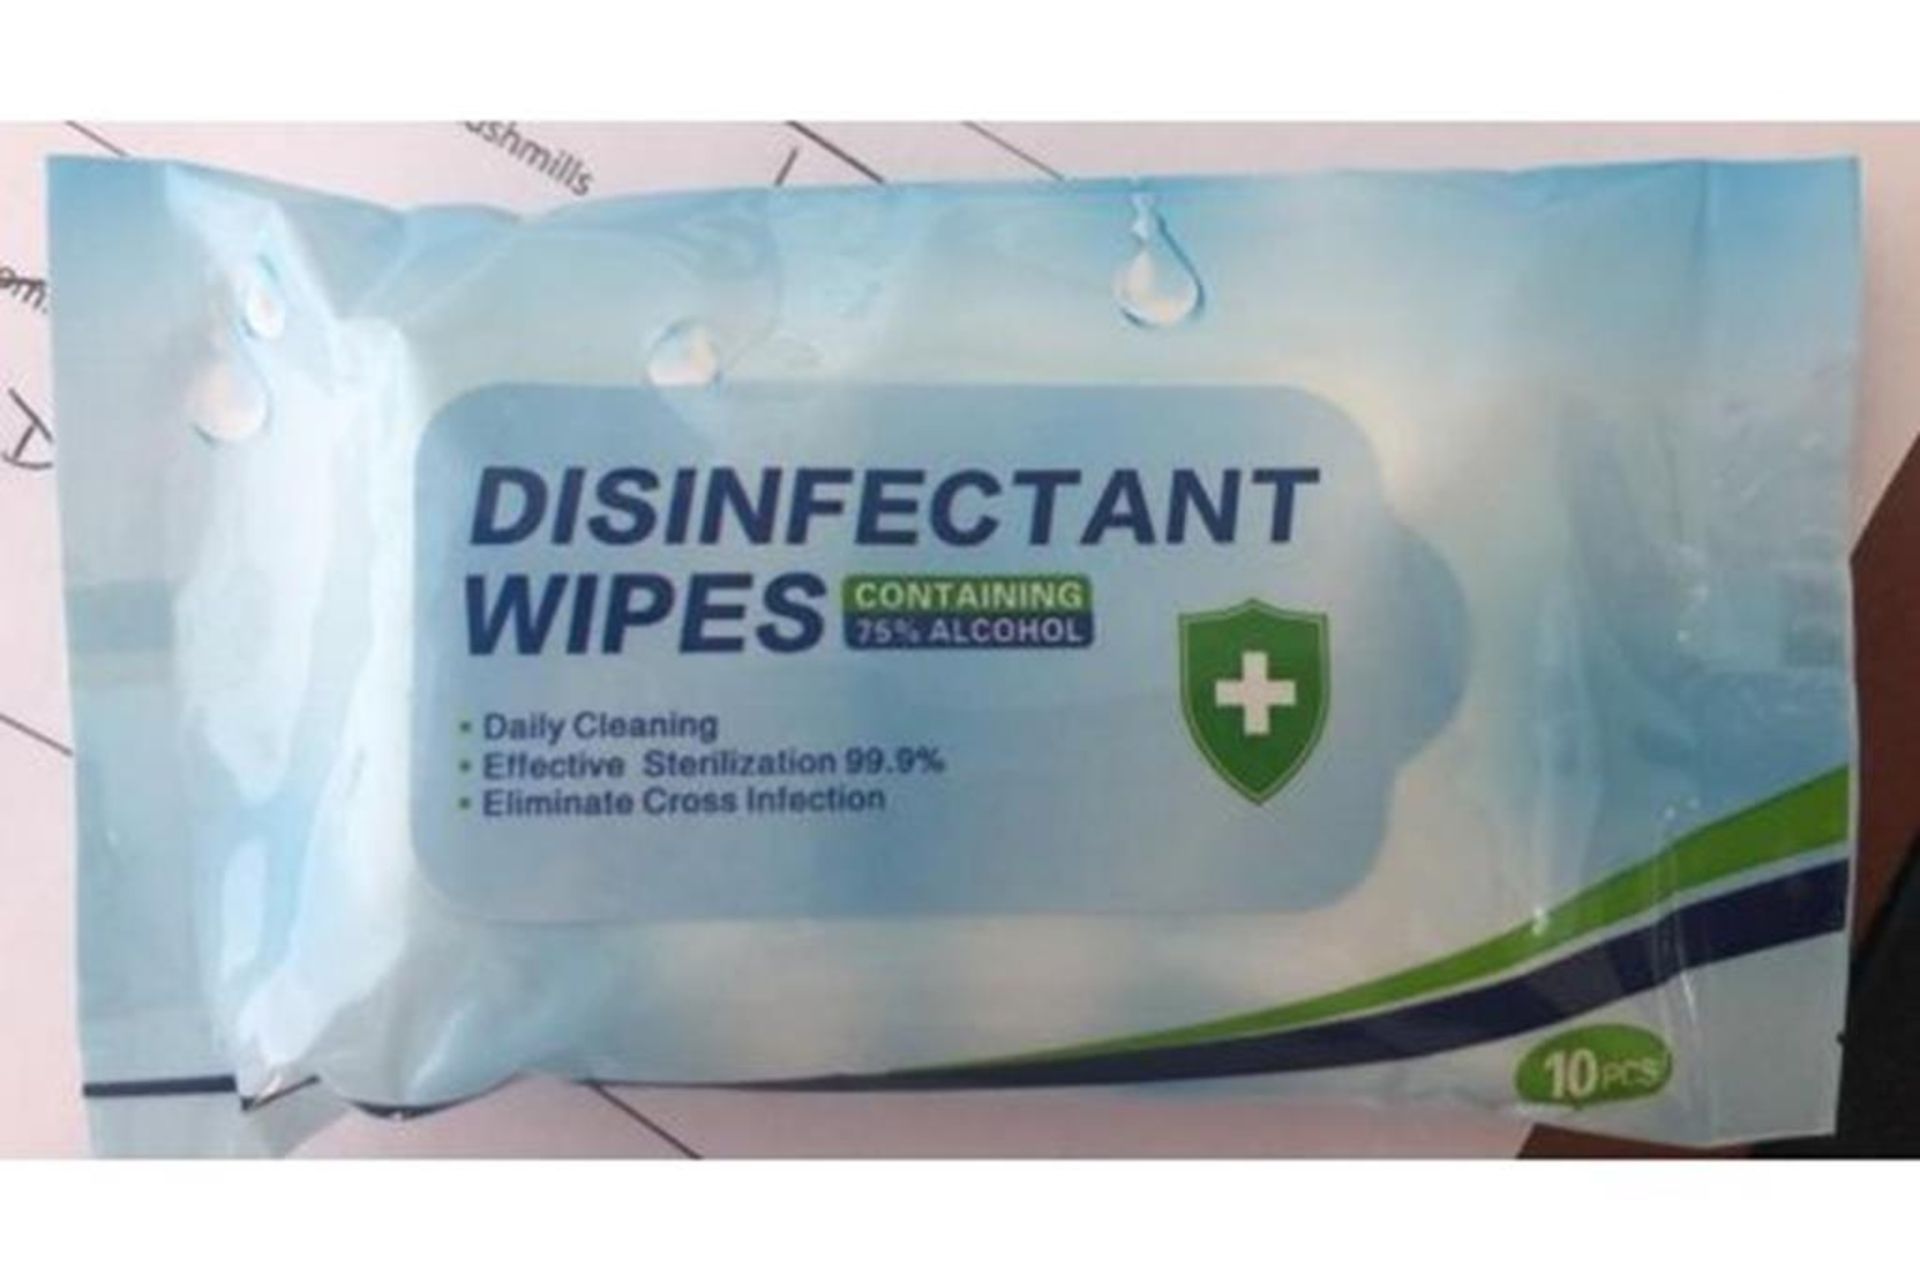 2400 Antibacterial Disinfectant Wipes (75% alcohol)